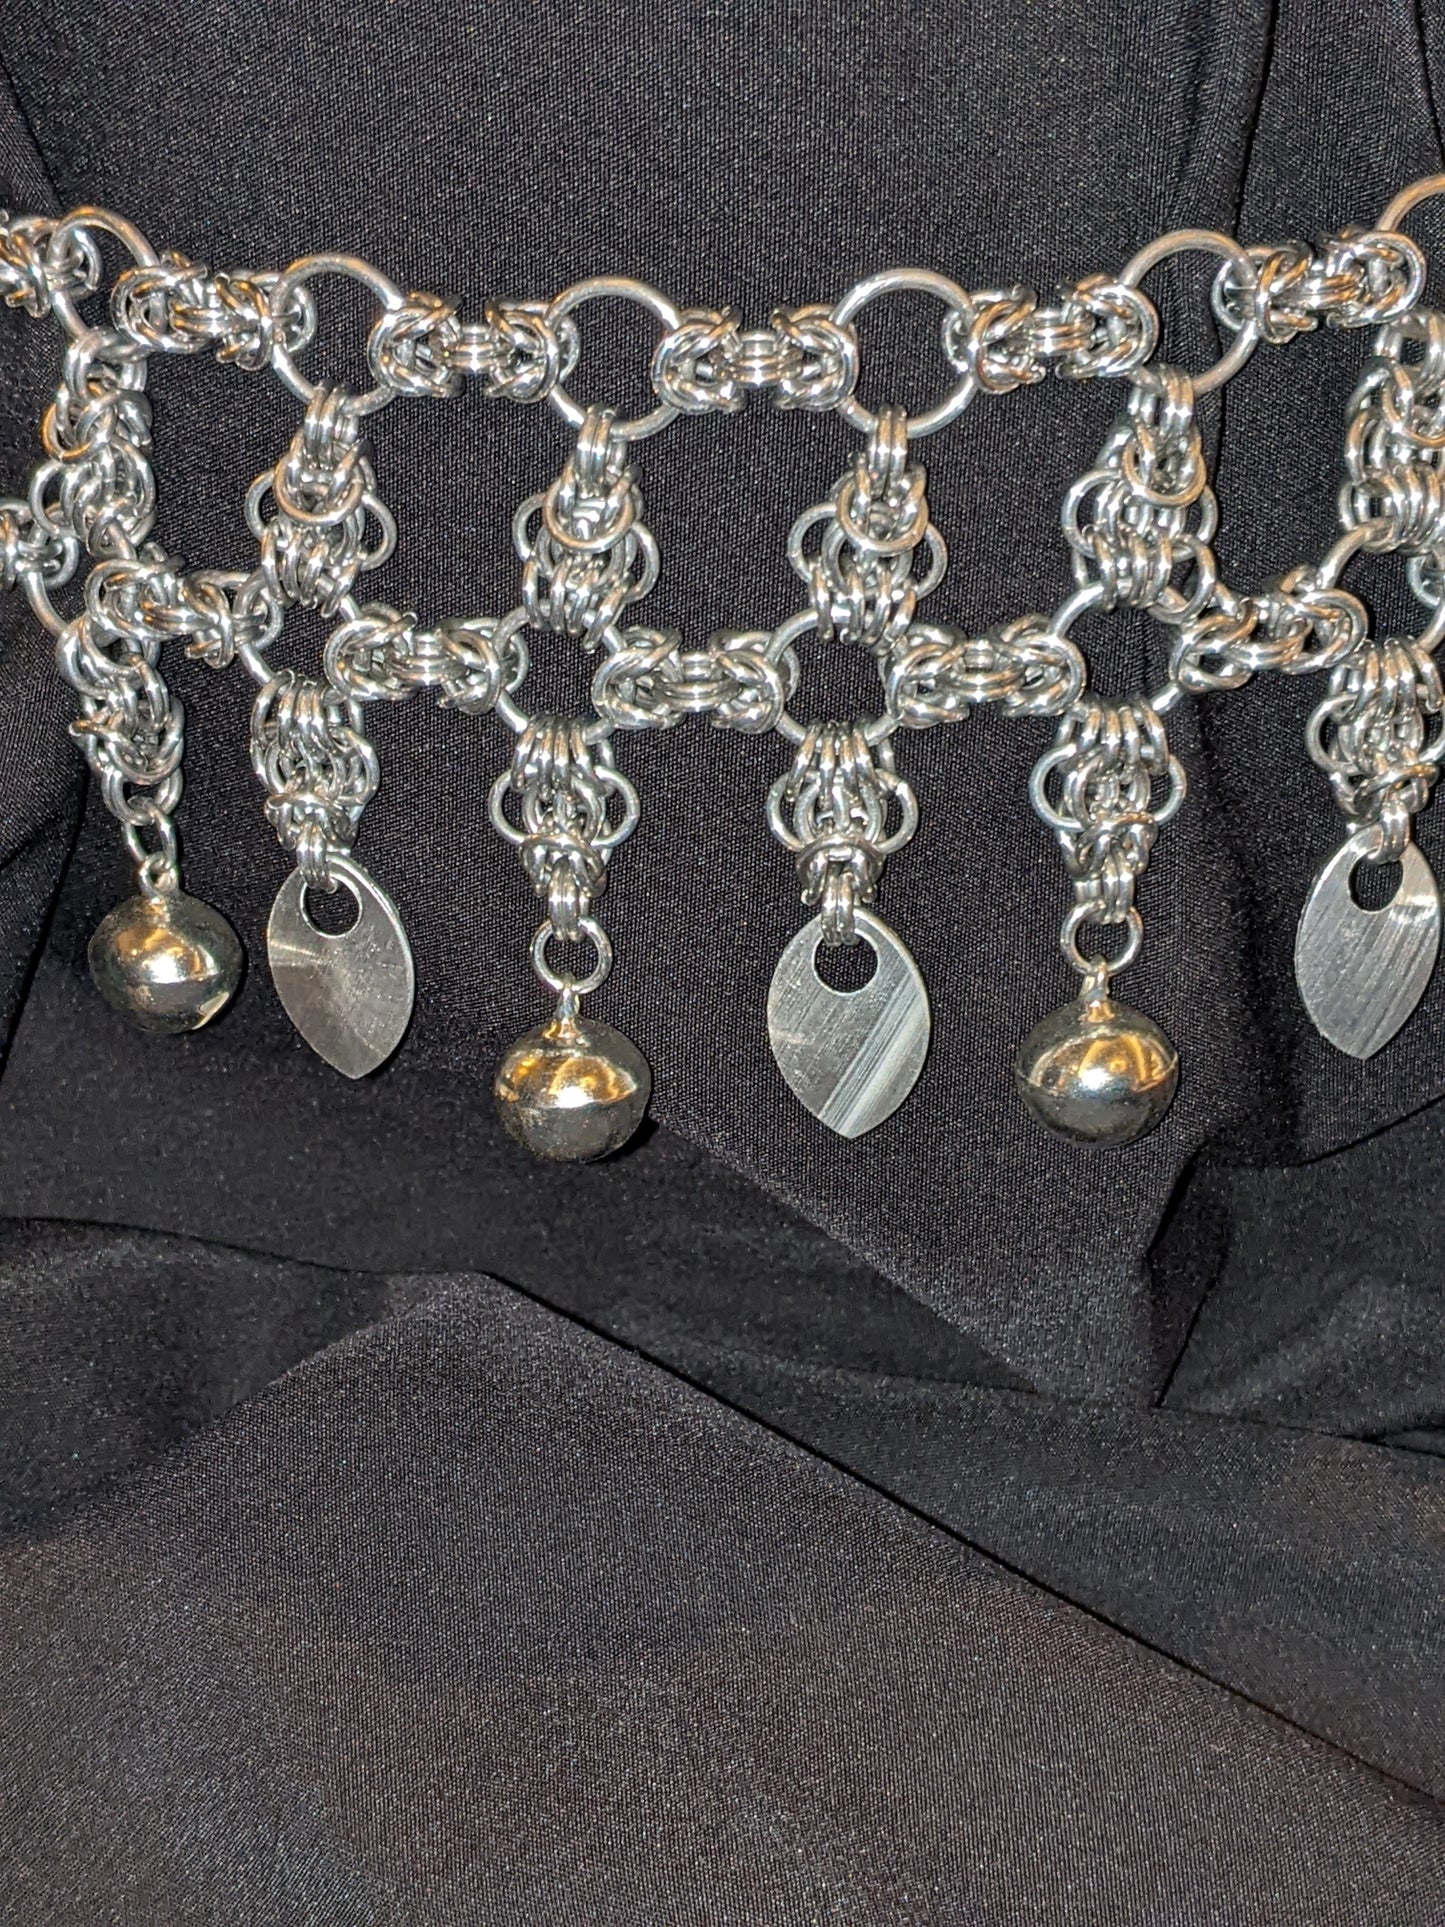 Dancer's Set Chainmail Jewelry Sets Dragon & Wolf Designs   